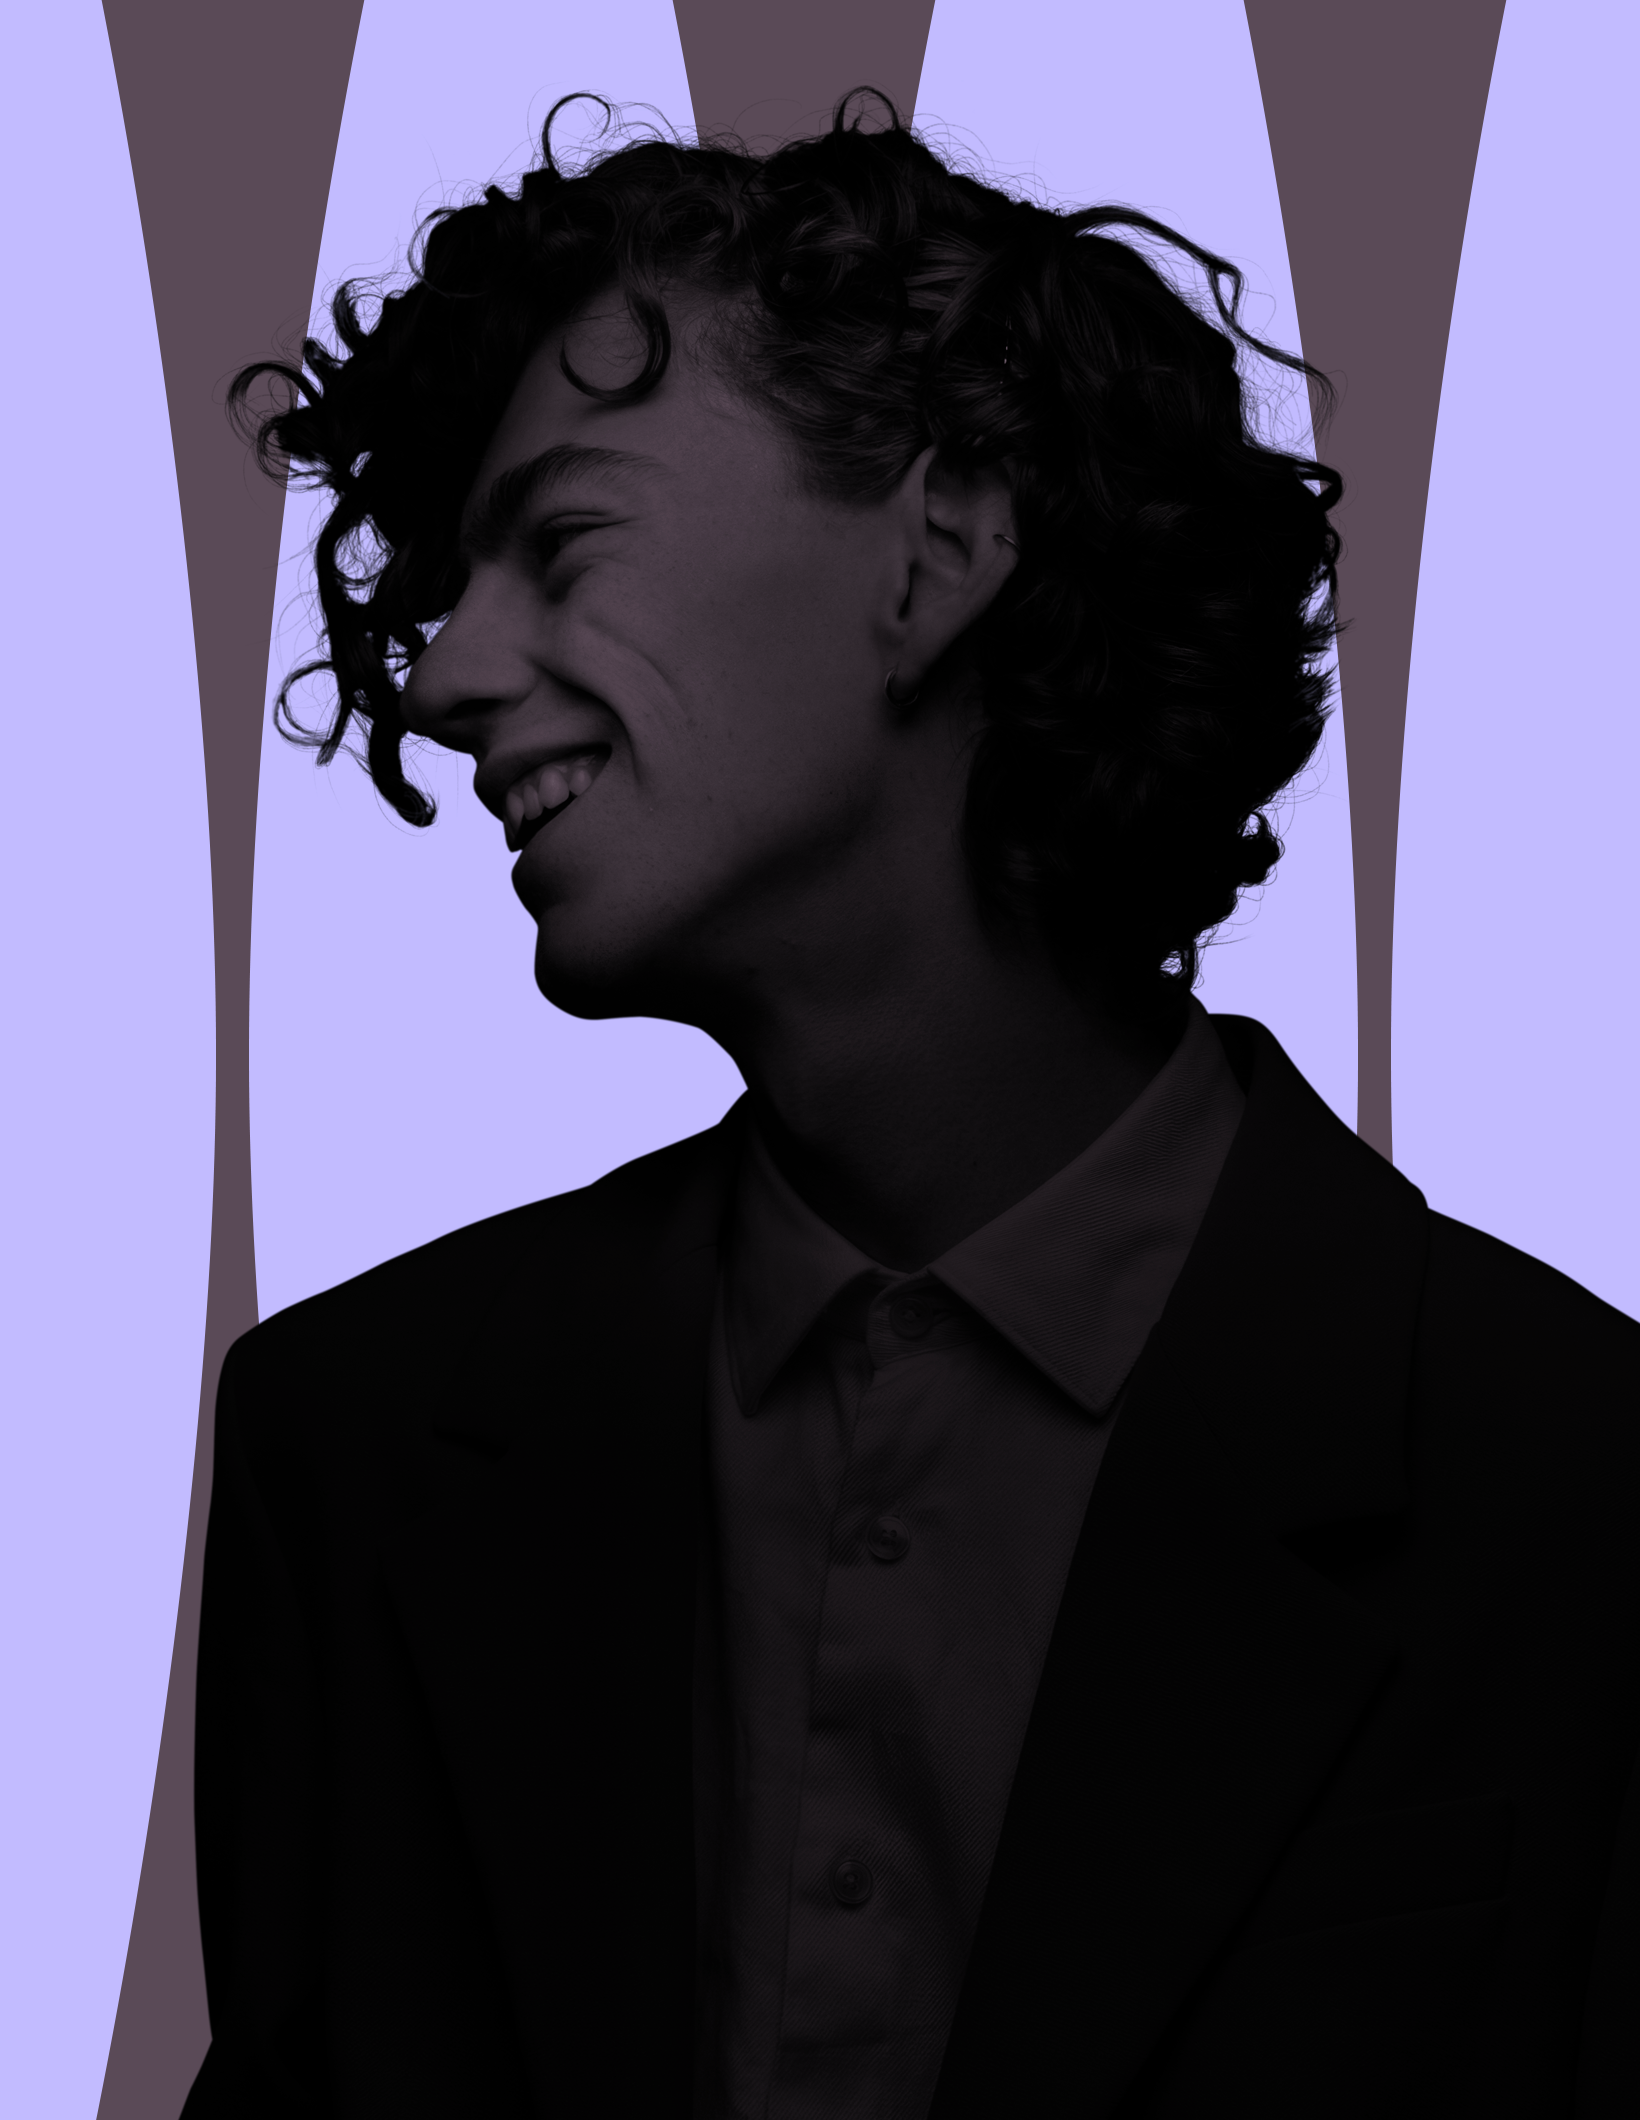 MPA branded image of young man smiling in silhouette